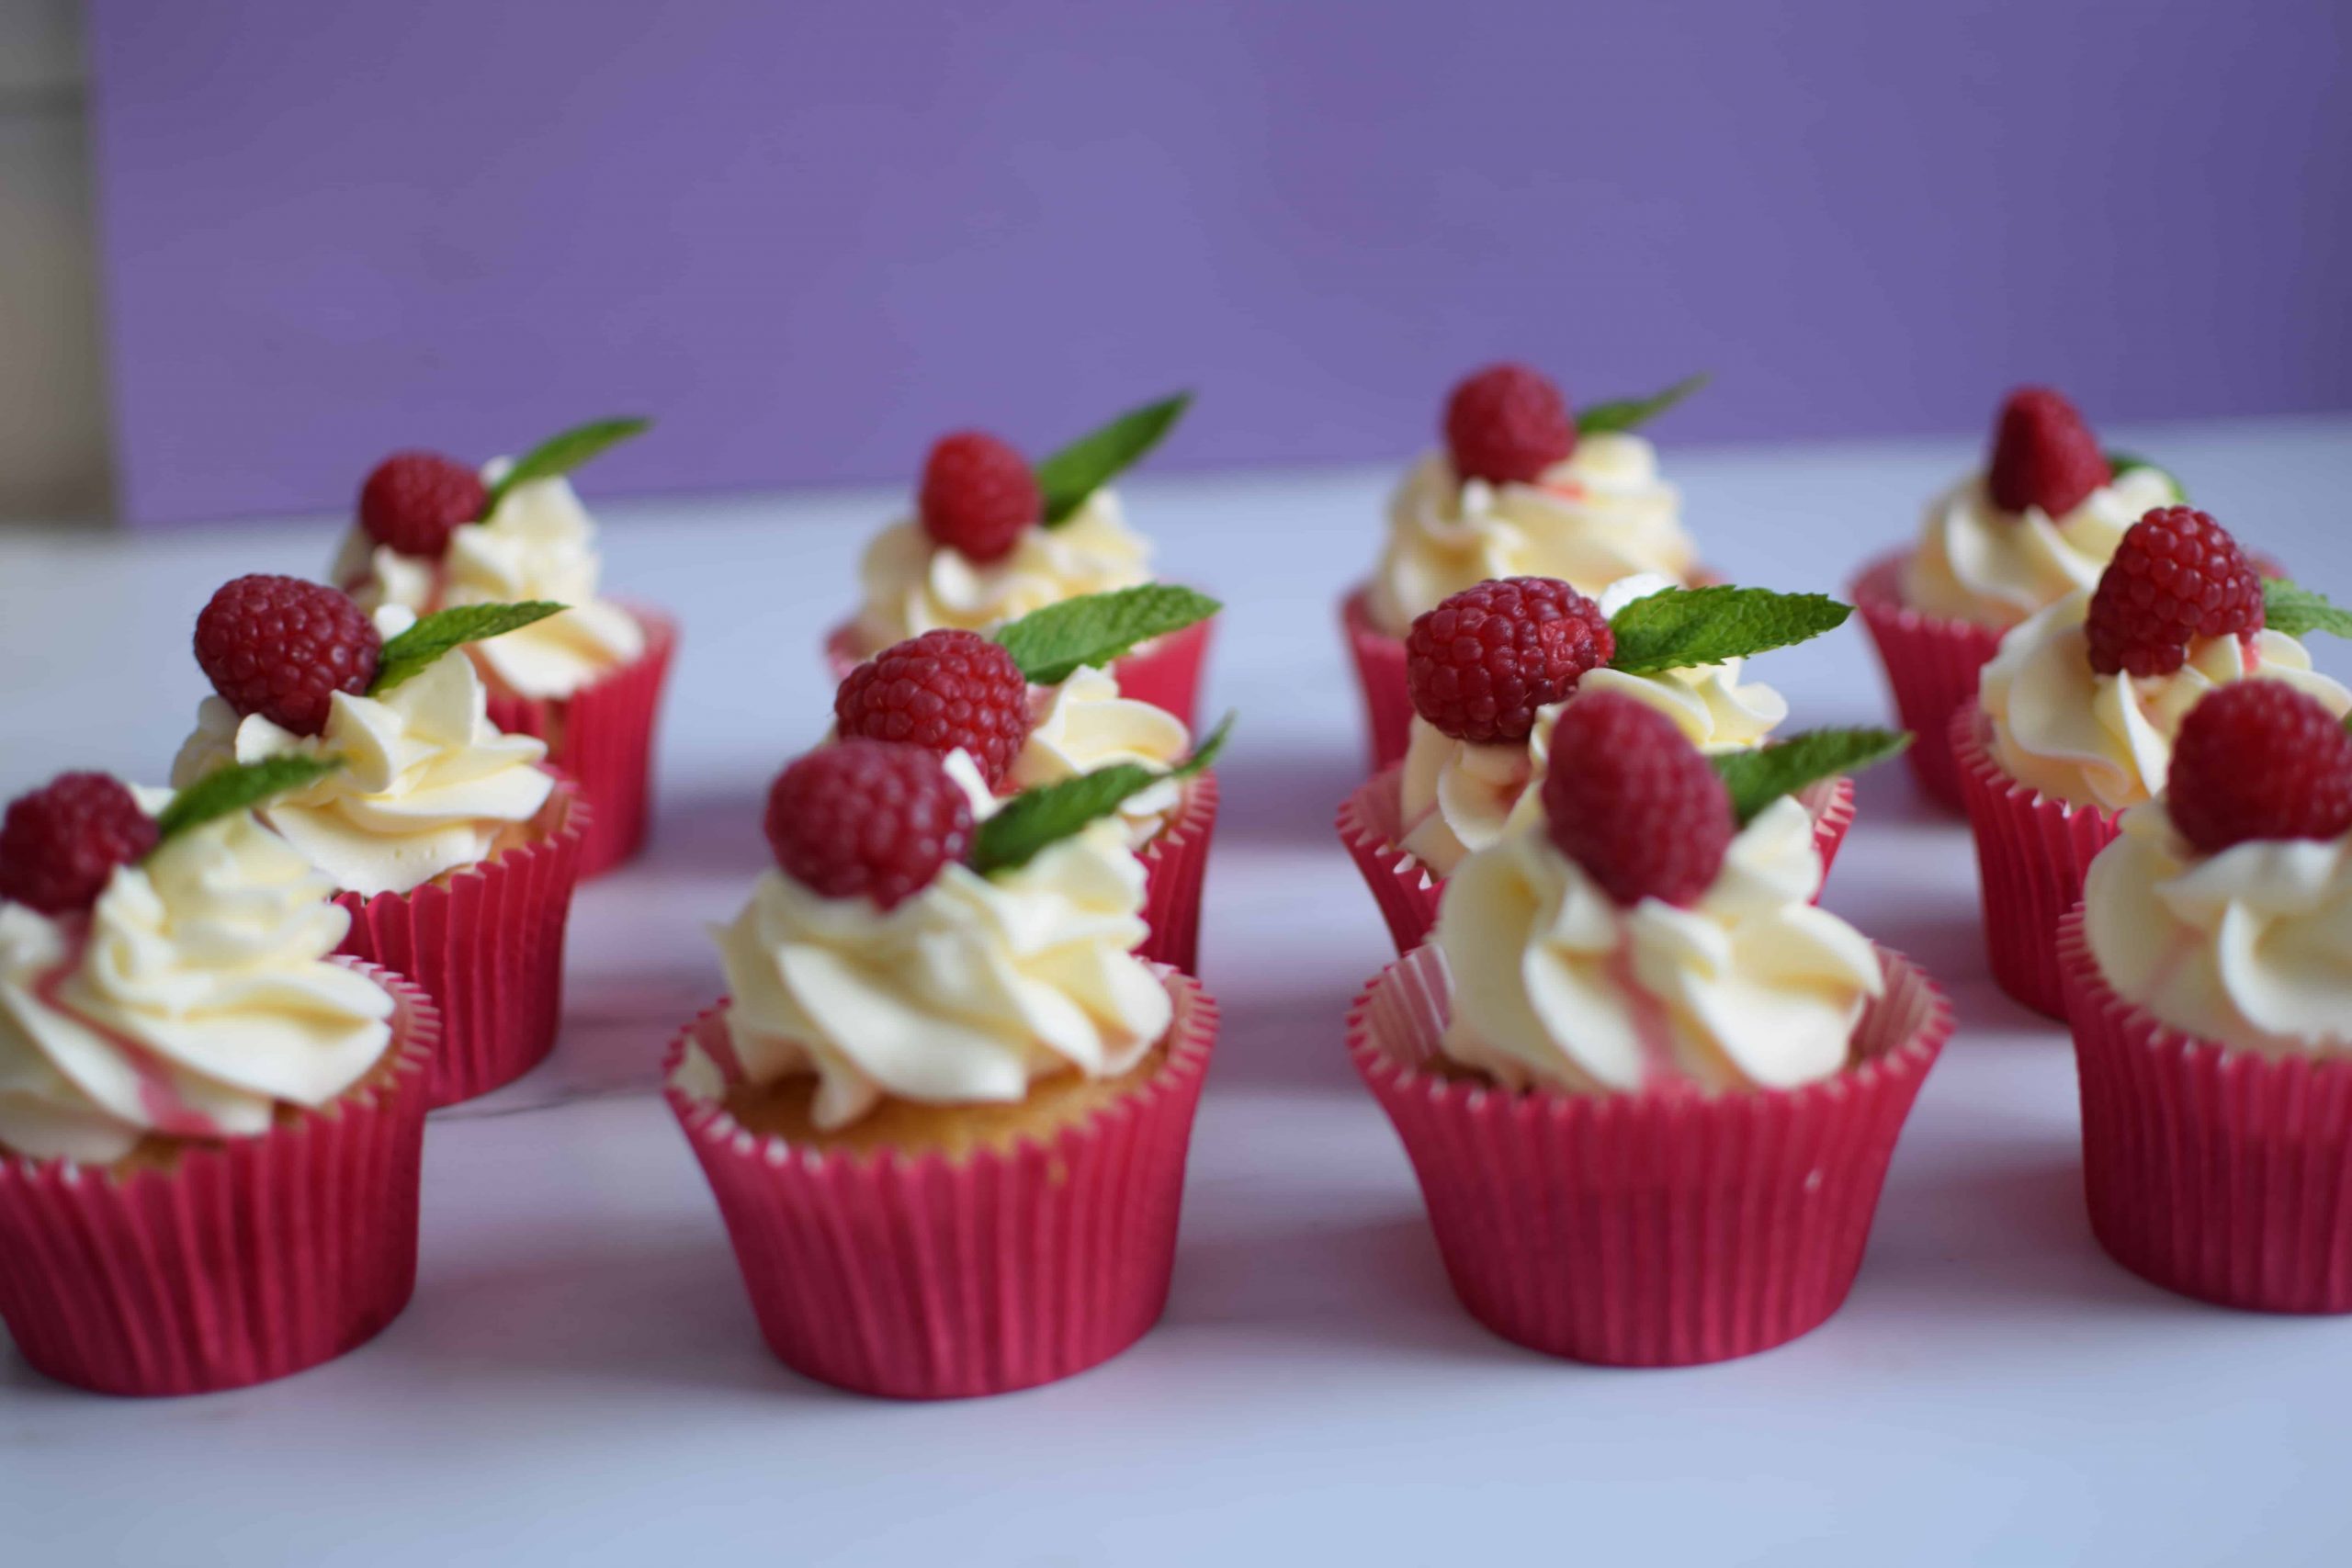 Copelands Raspberry and Mint infused Gin Cupcakes